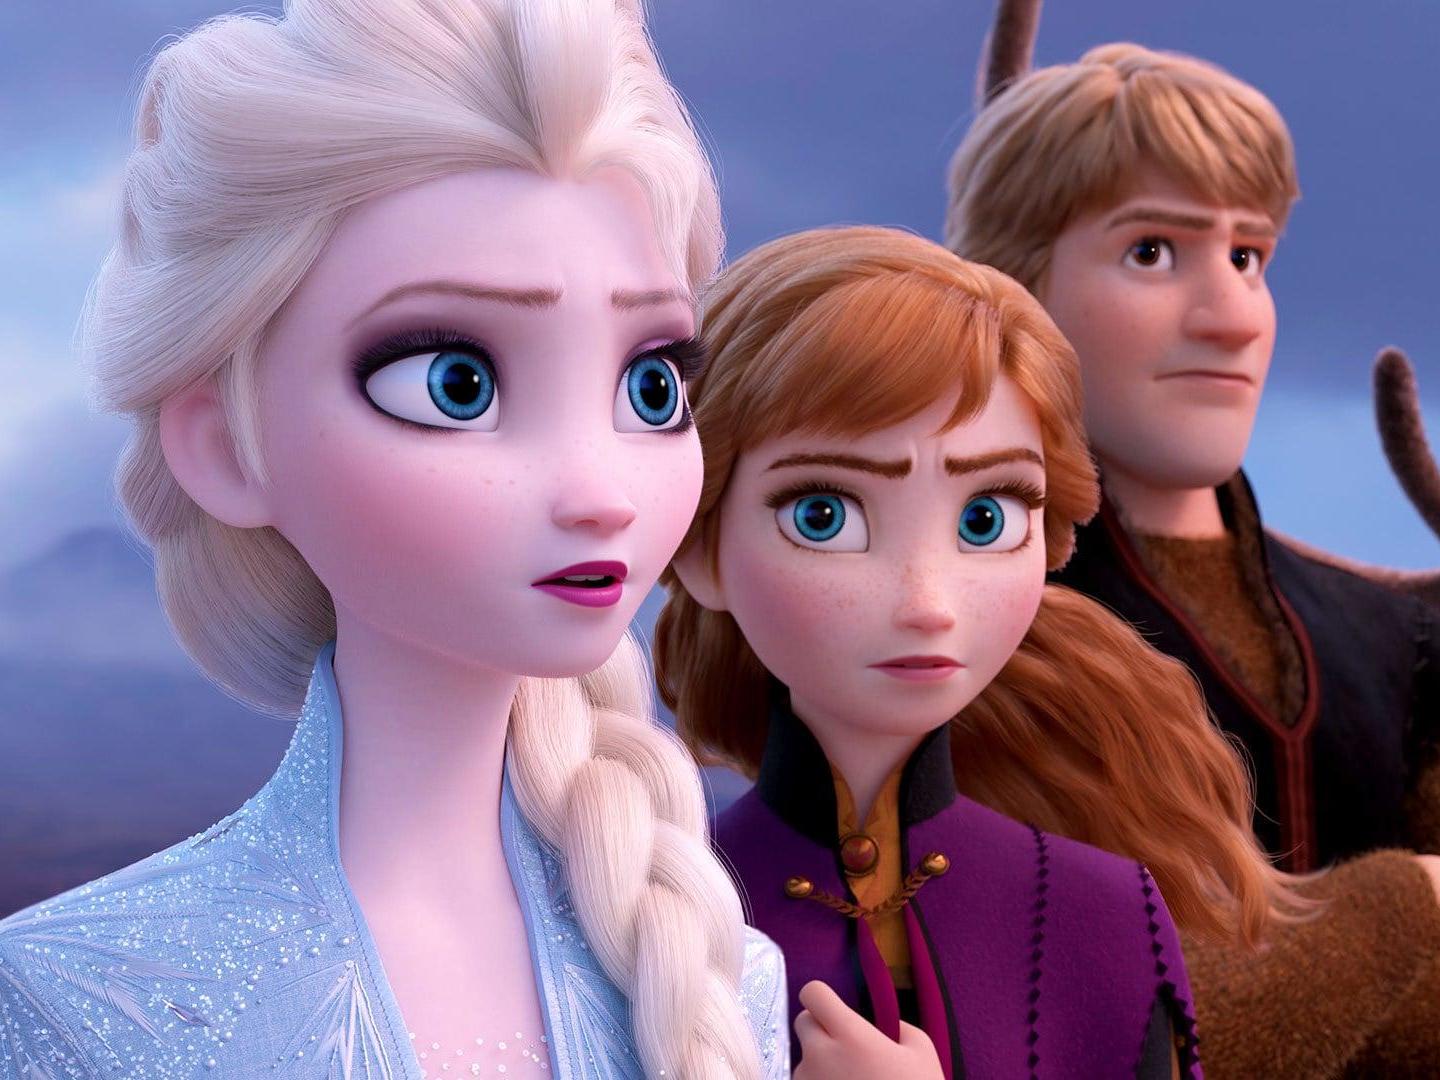 ‘Frozen 2’ is released on Friday